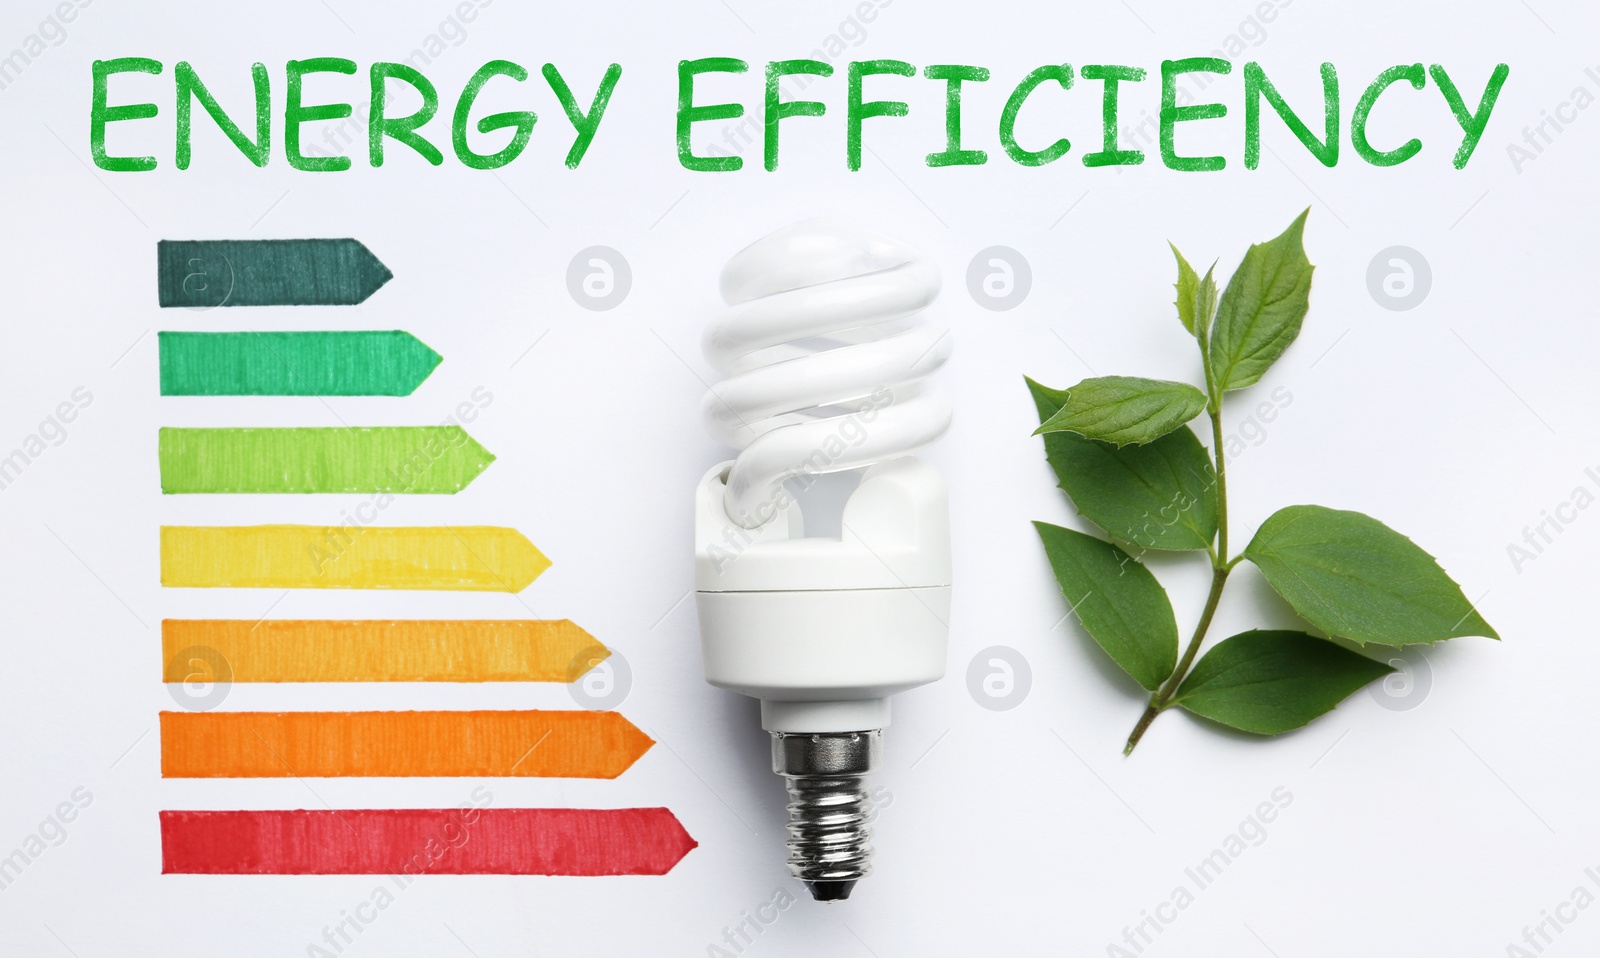 Image of Flat lay composition with energy efficiency rating chart, fluorescent light bulb and leaves on white background